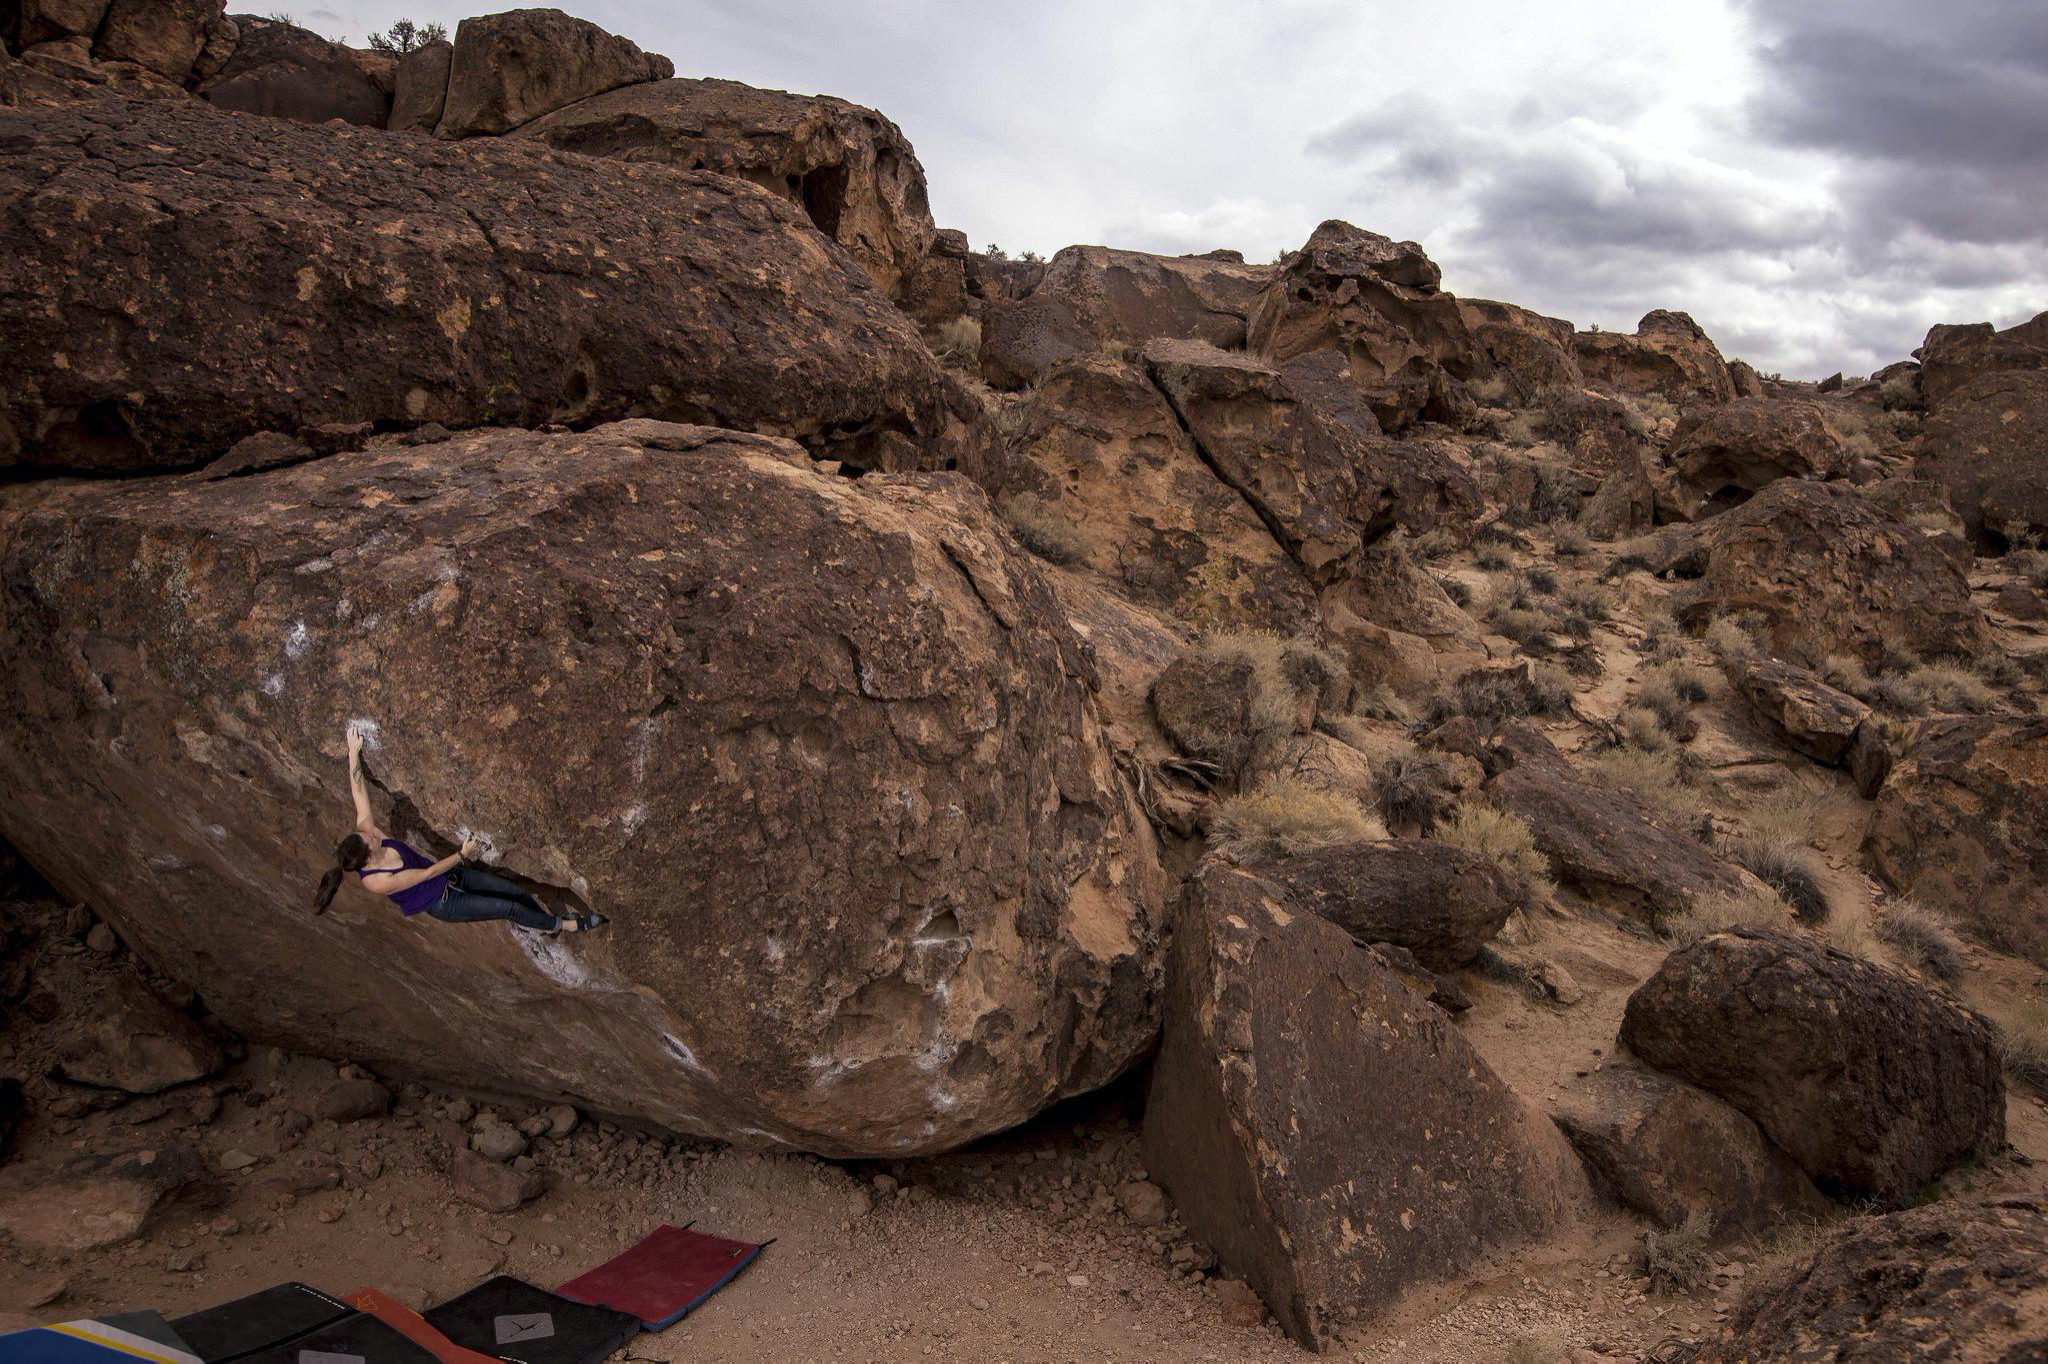 Climbers will find world-class bouldering near the town of Bishop, California.